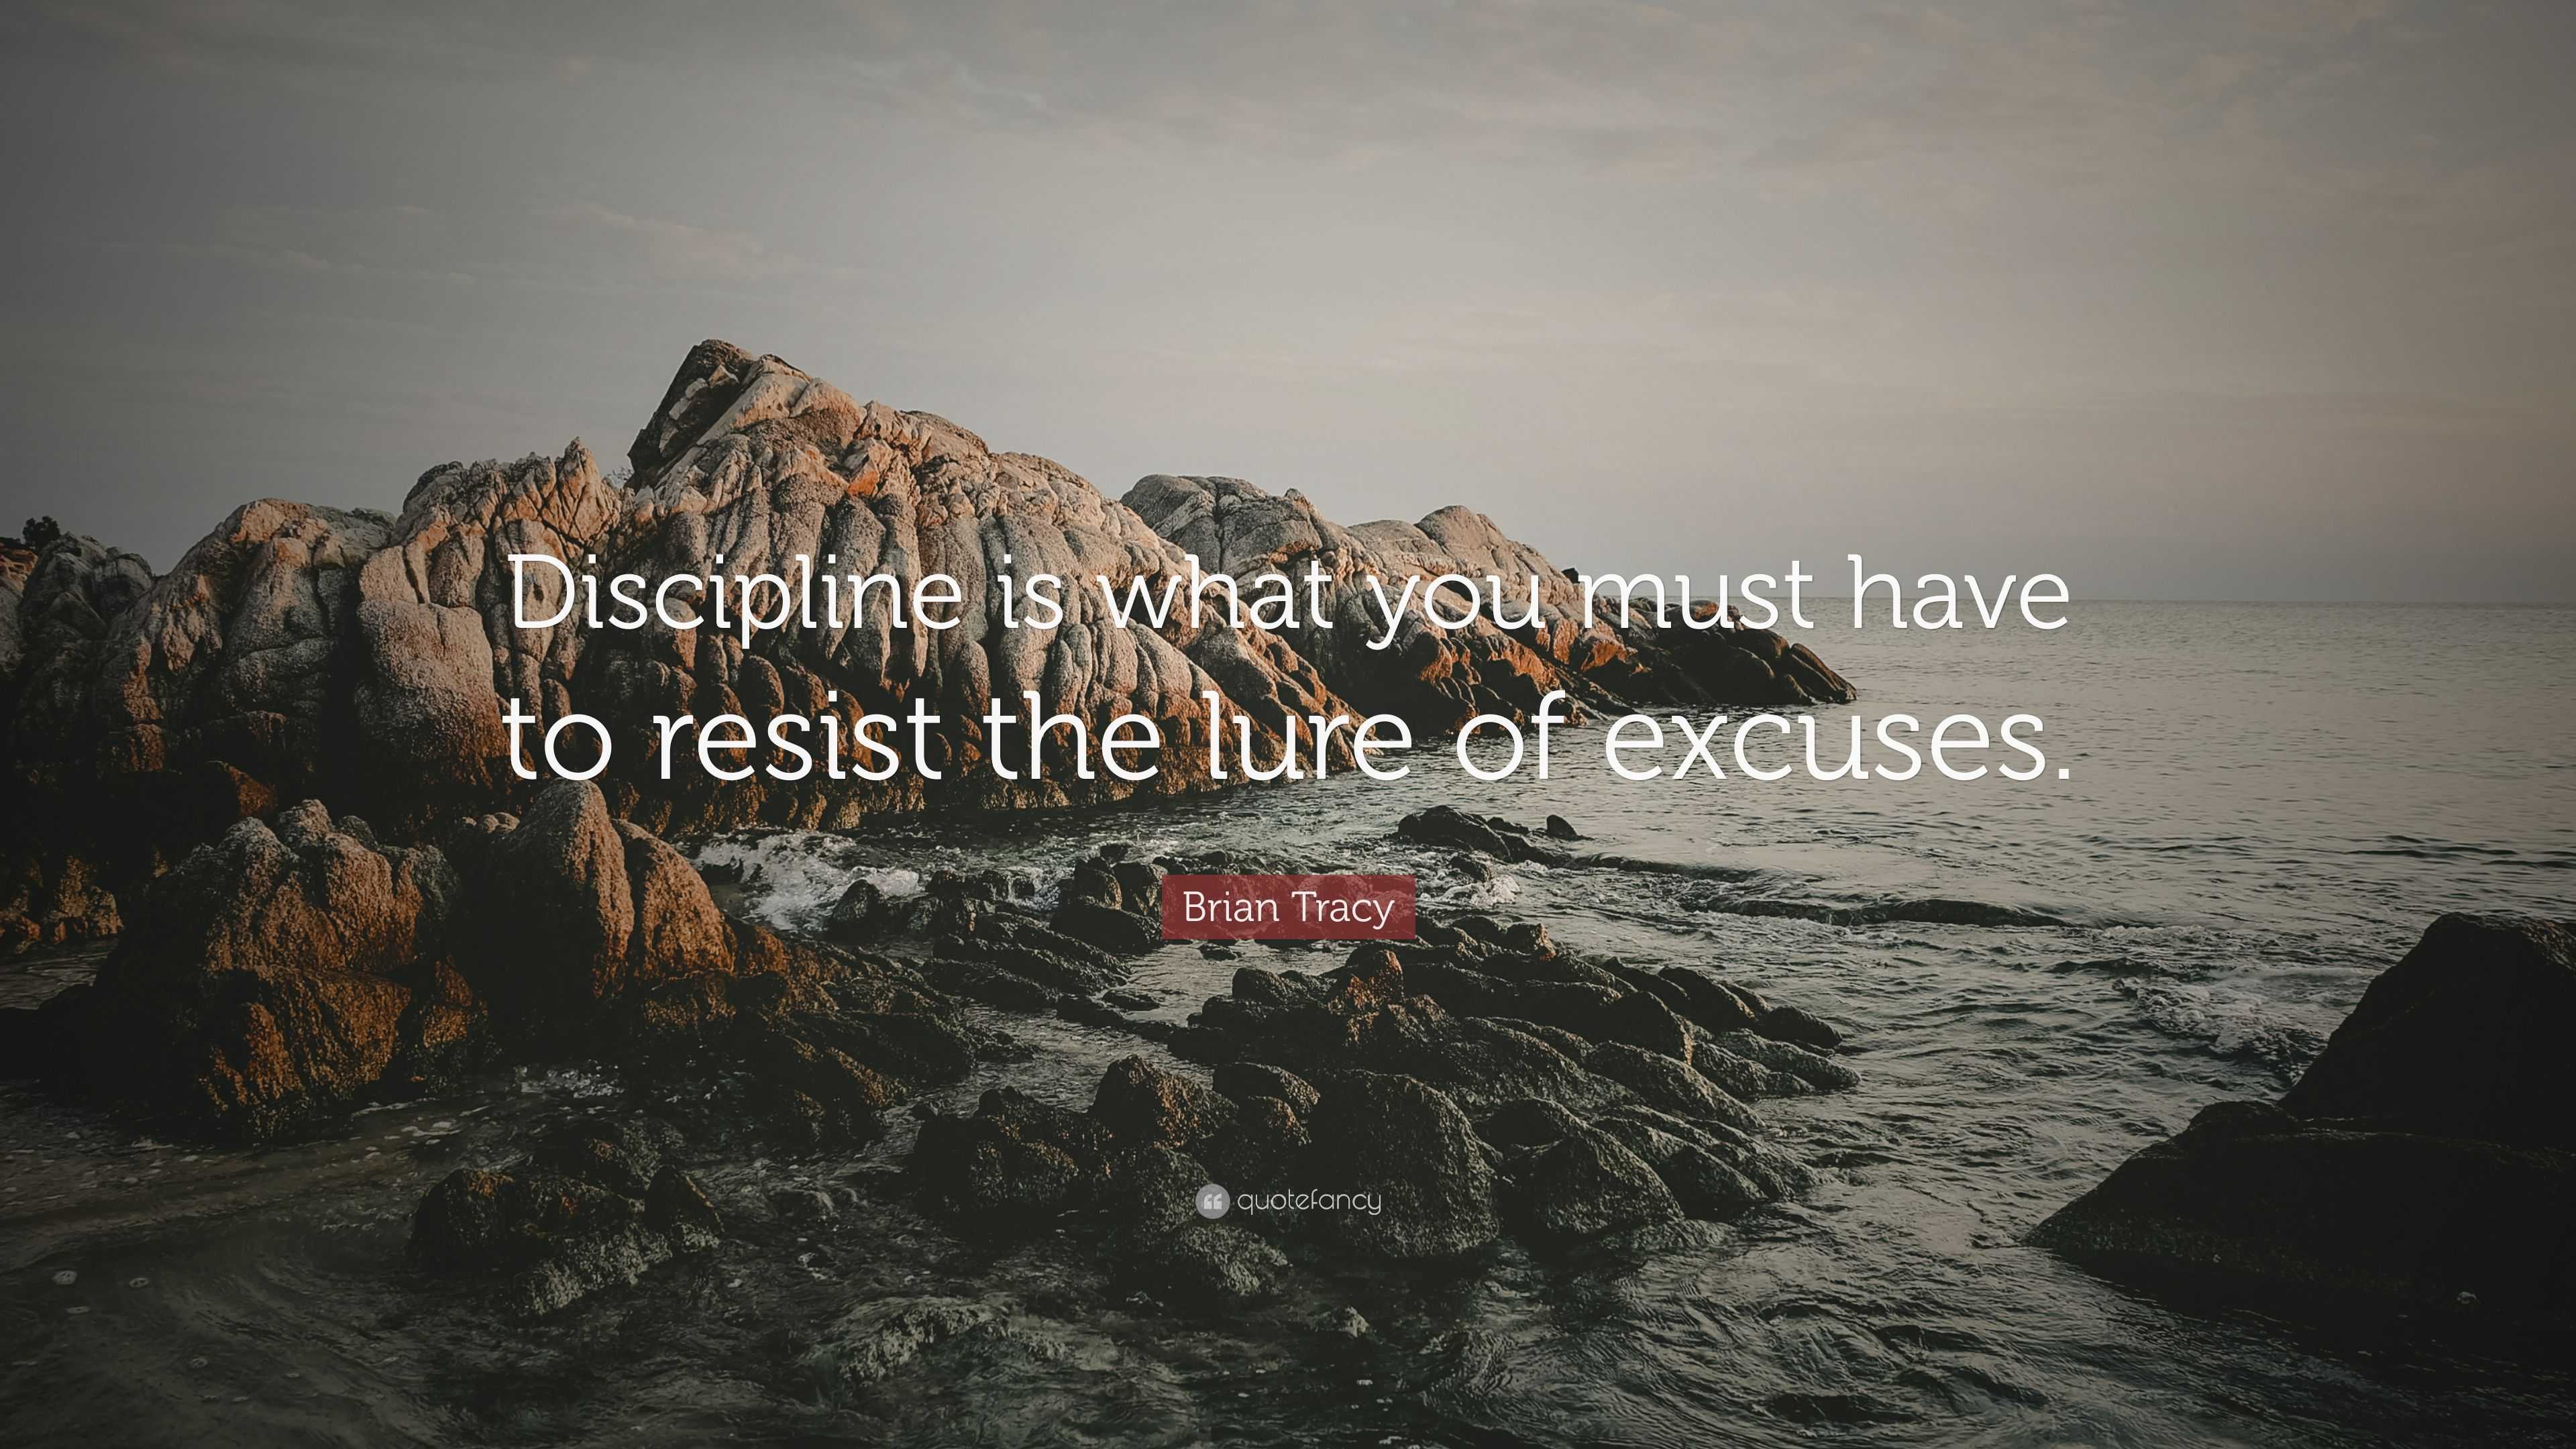 Brian Tracy Quote: “Discipline is what you must have to resist the lure ...